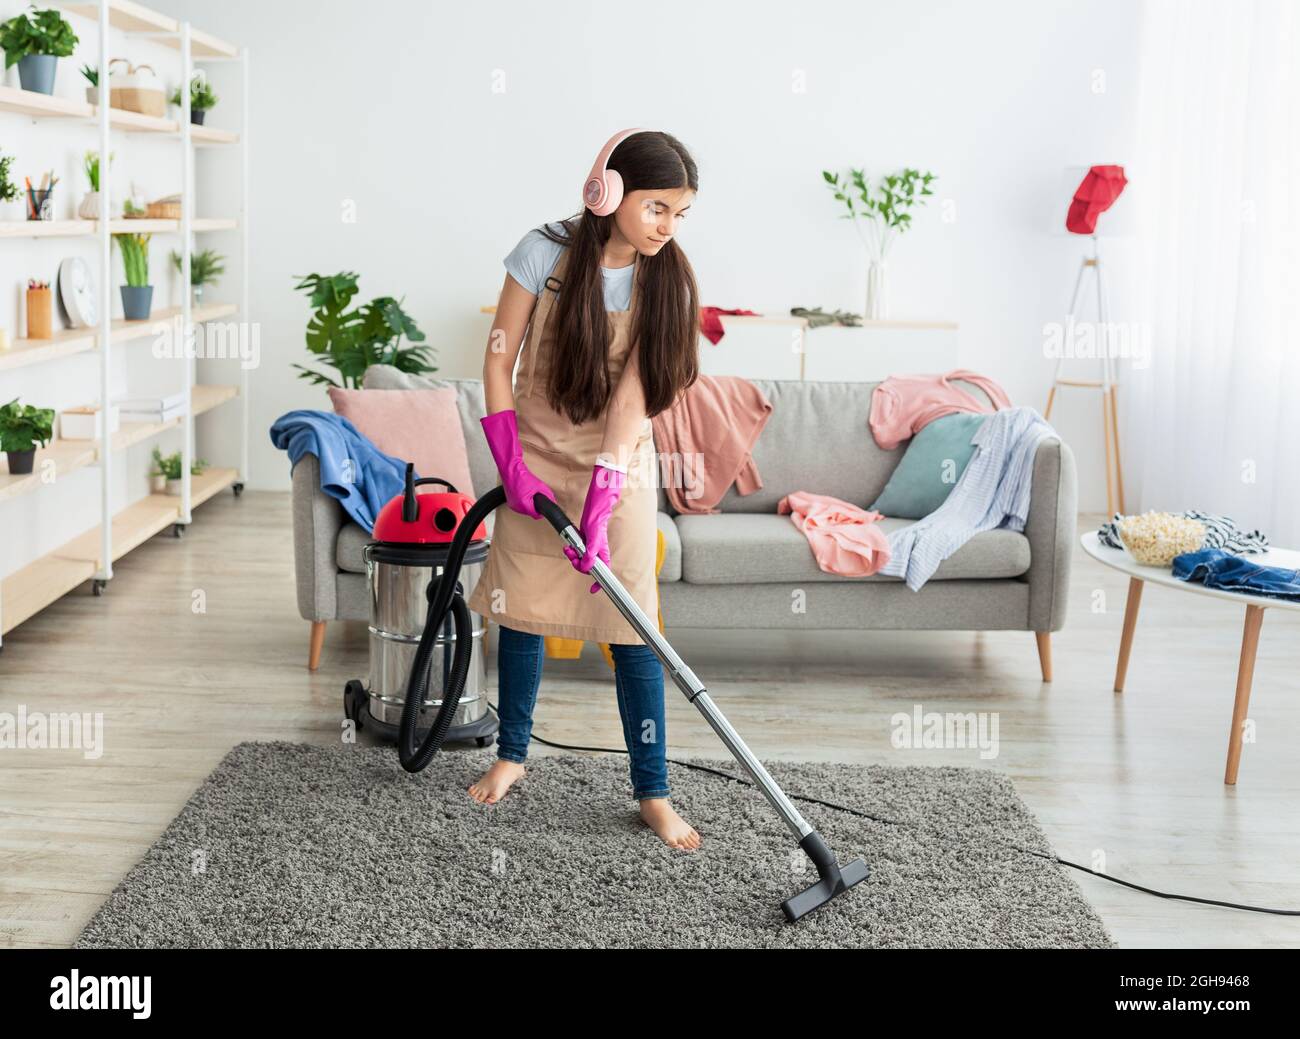 Full length of Indian teen girl cleaning apartment, wearing headphones, listening to music while vacuuming floor Stock Photo